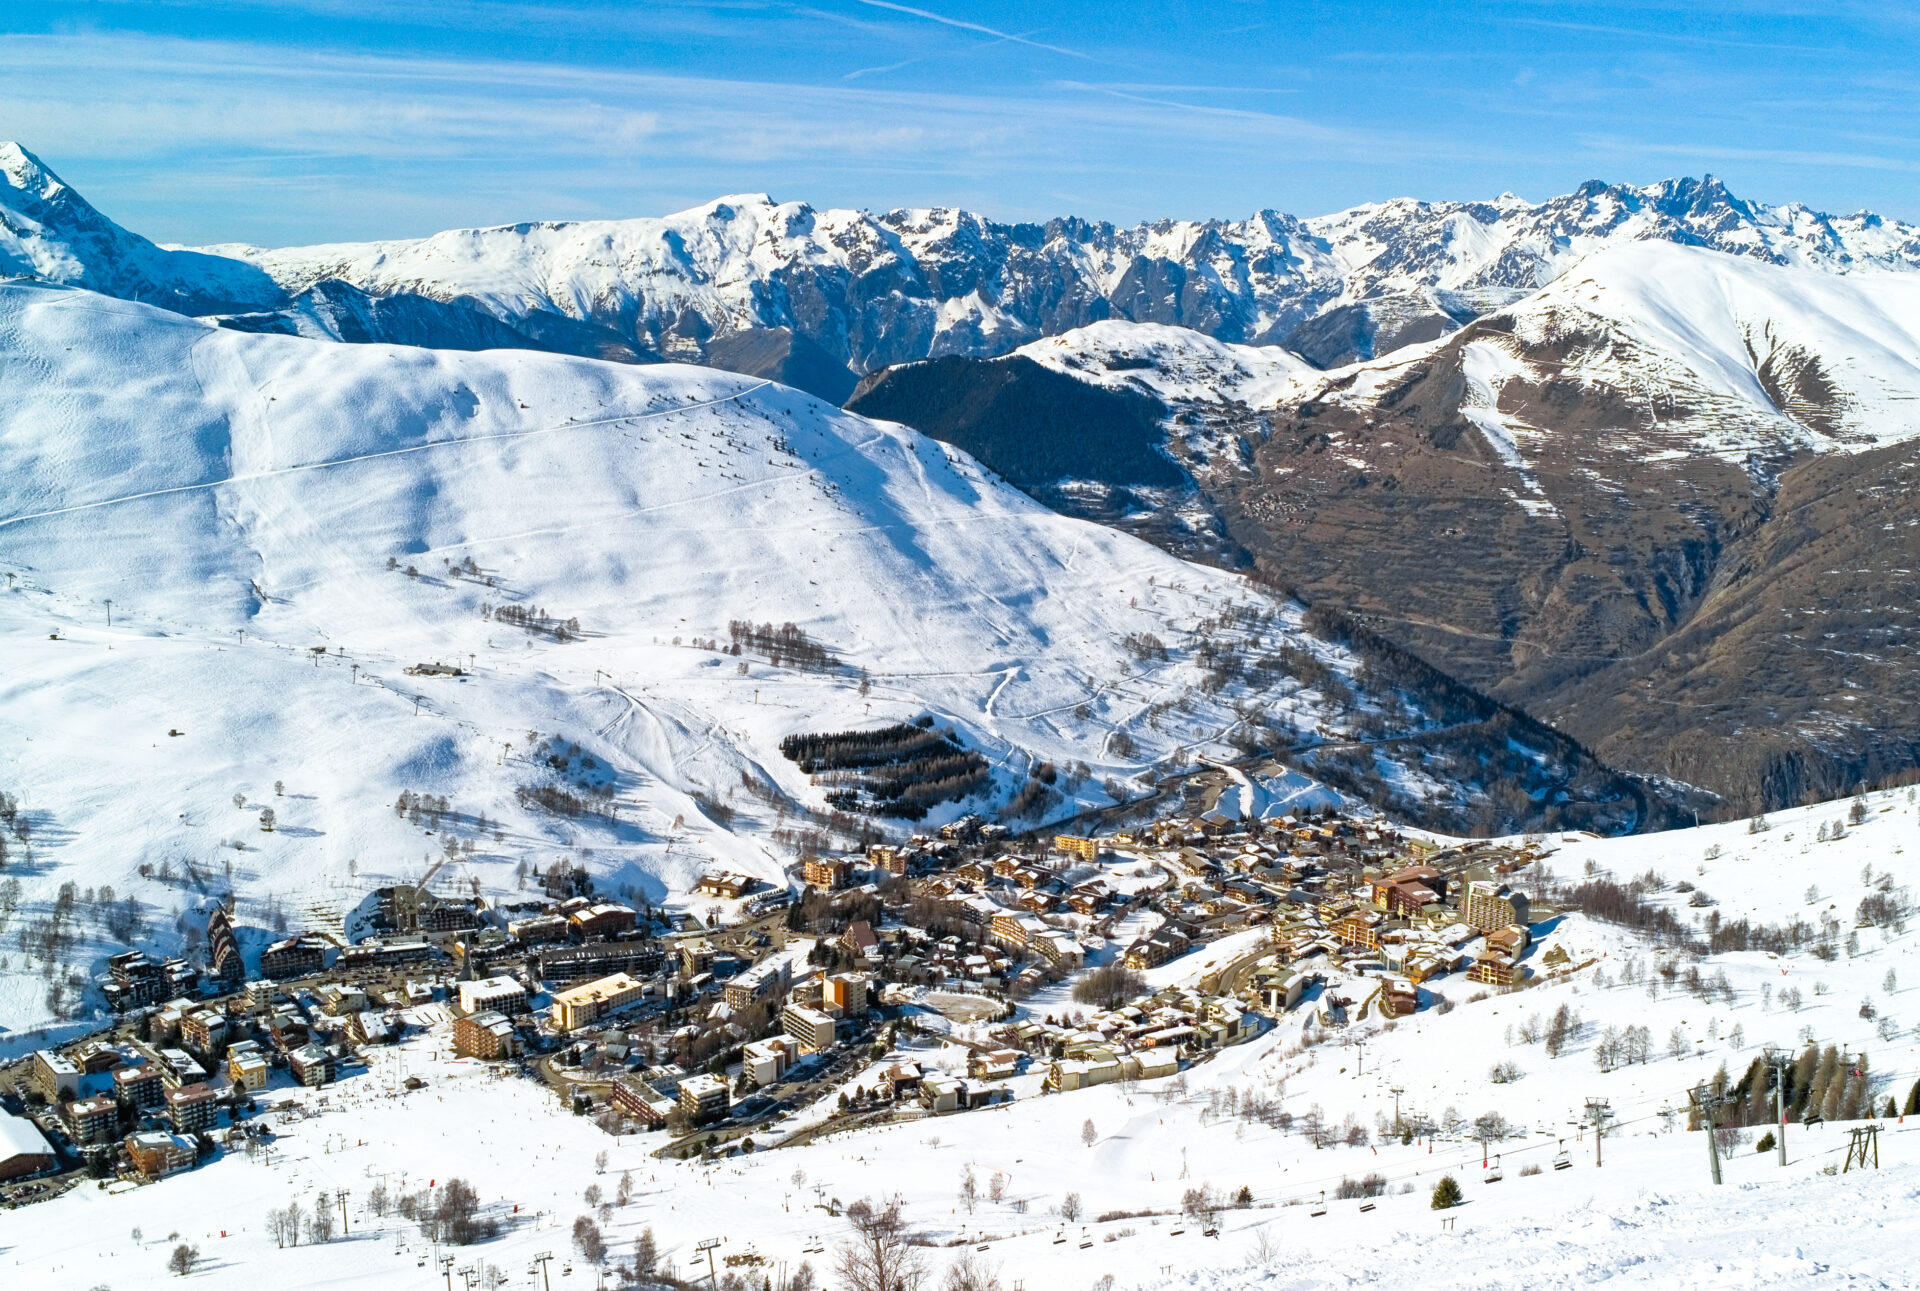 Les Deux Alpes from above